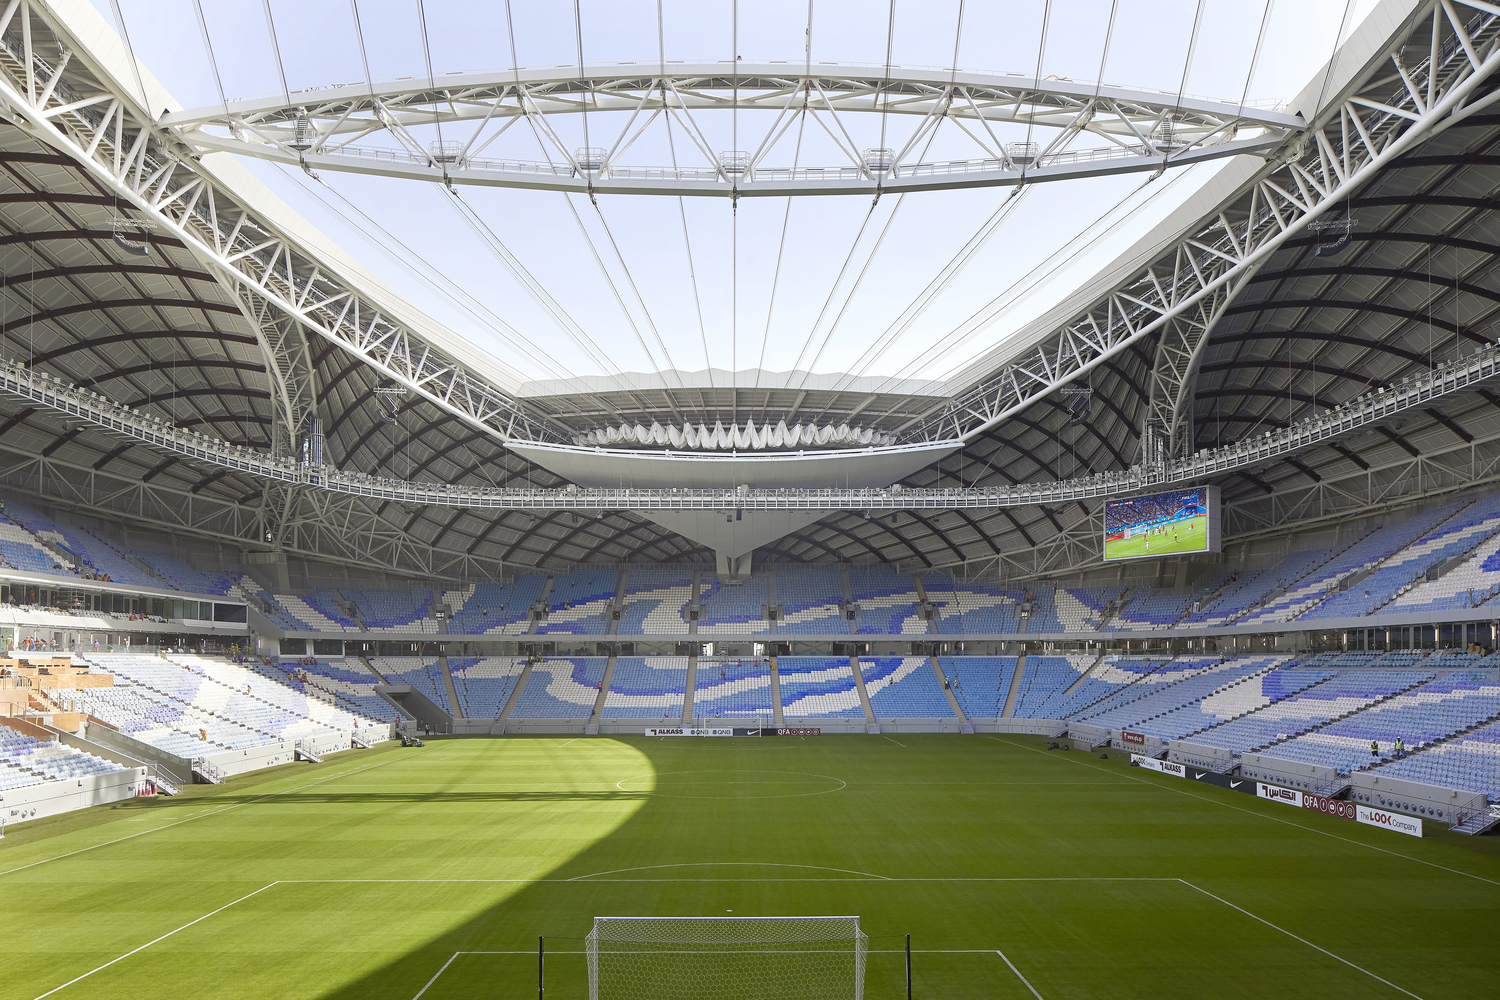 Gallery of Explore the Full List of Football Stadiums Ahead of 2022 FIFA World Cup in Qatar